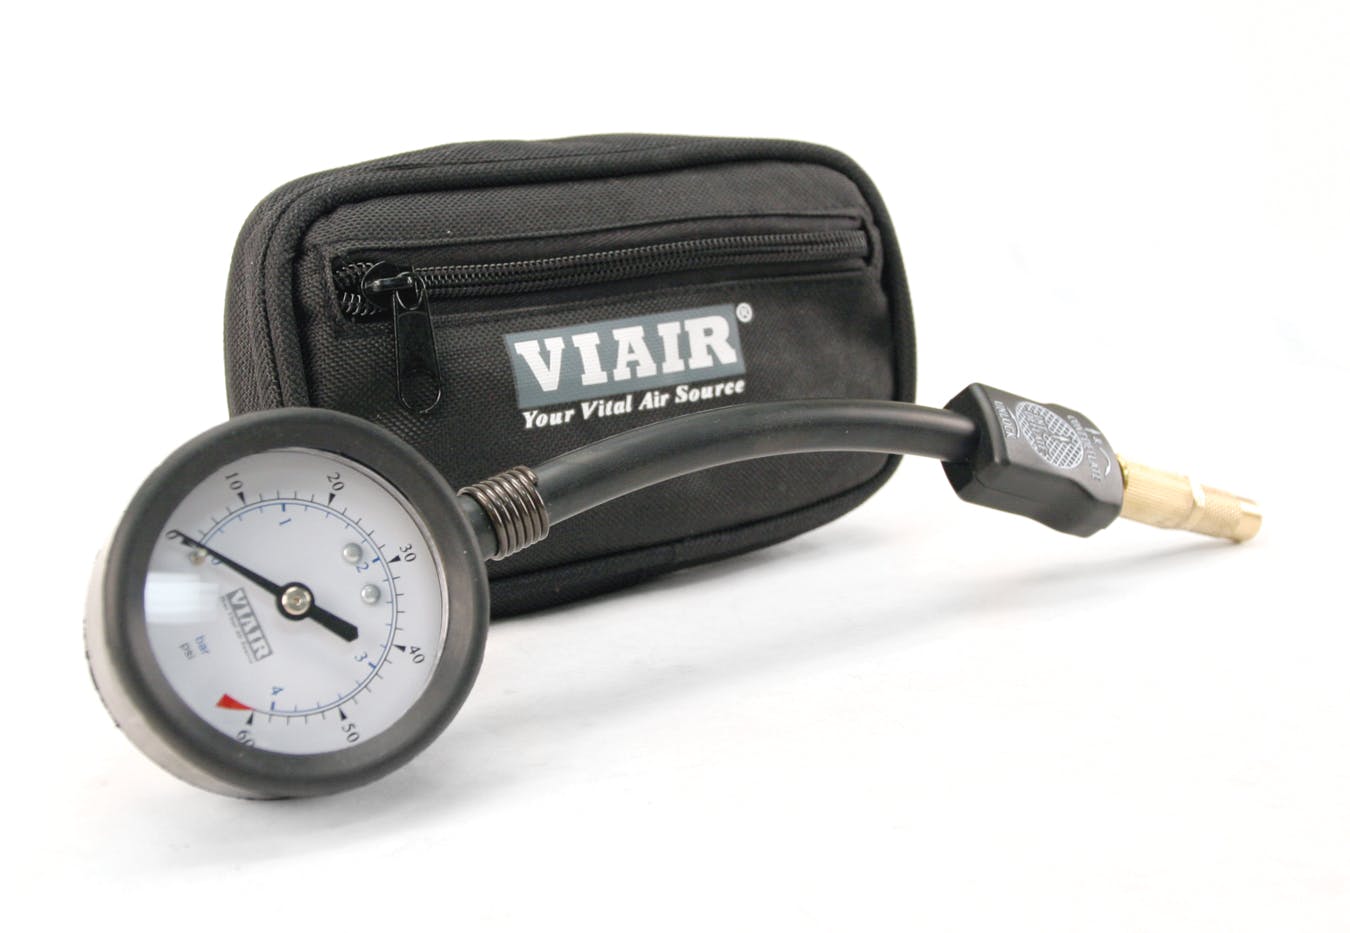 VIAIR 00032 3 in 1 Air Down Gauge  0 to 60 PSI  with Storage Pouch